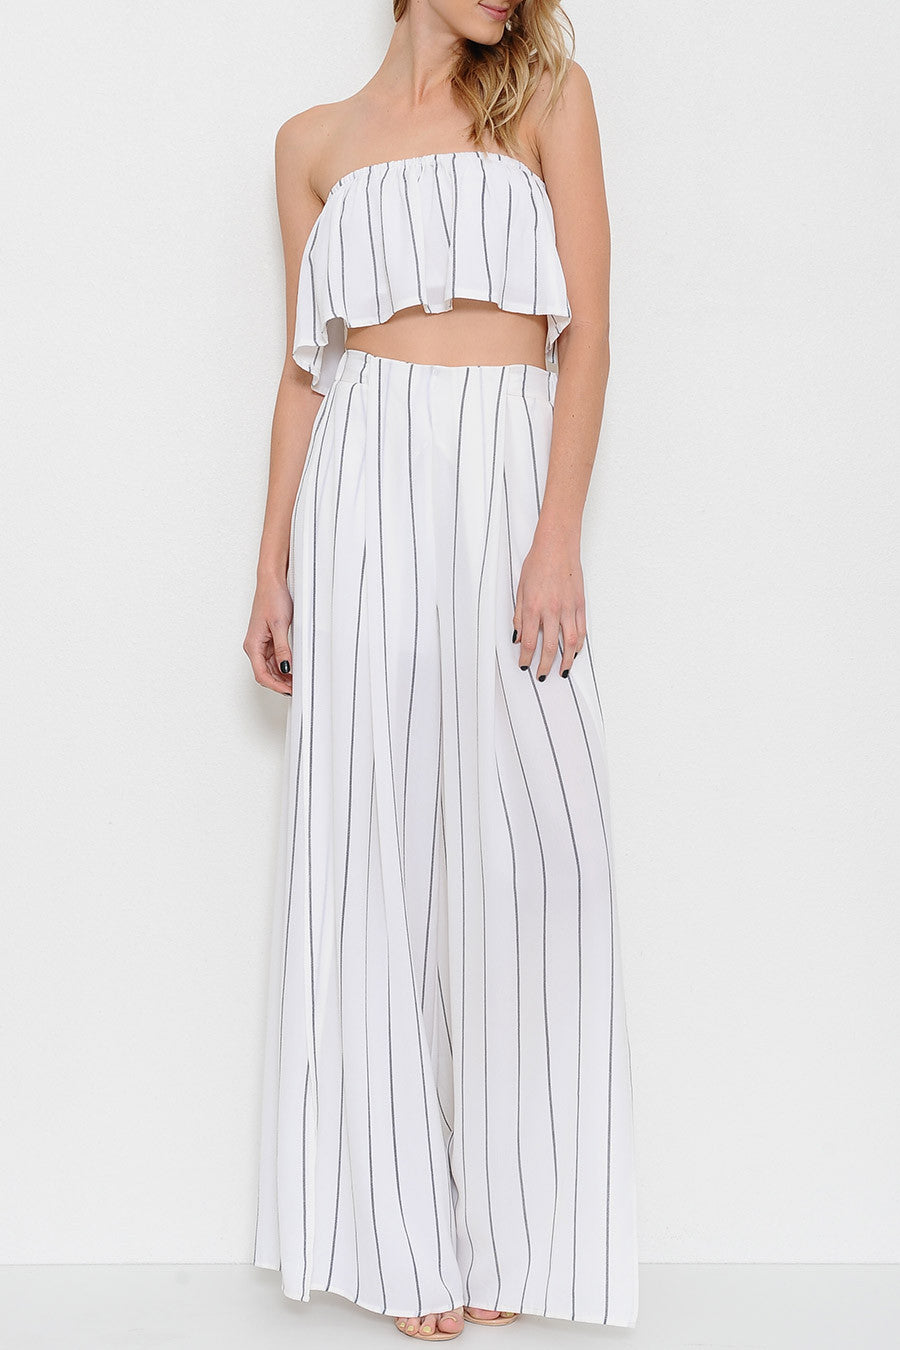 Summer Strapless White Contrast Top